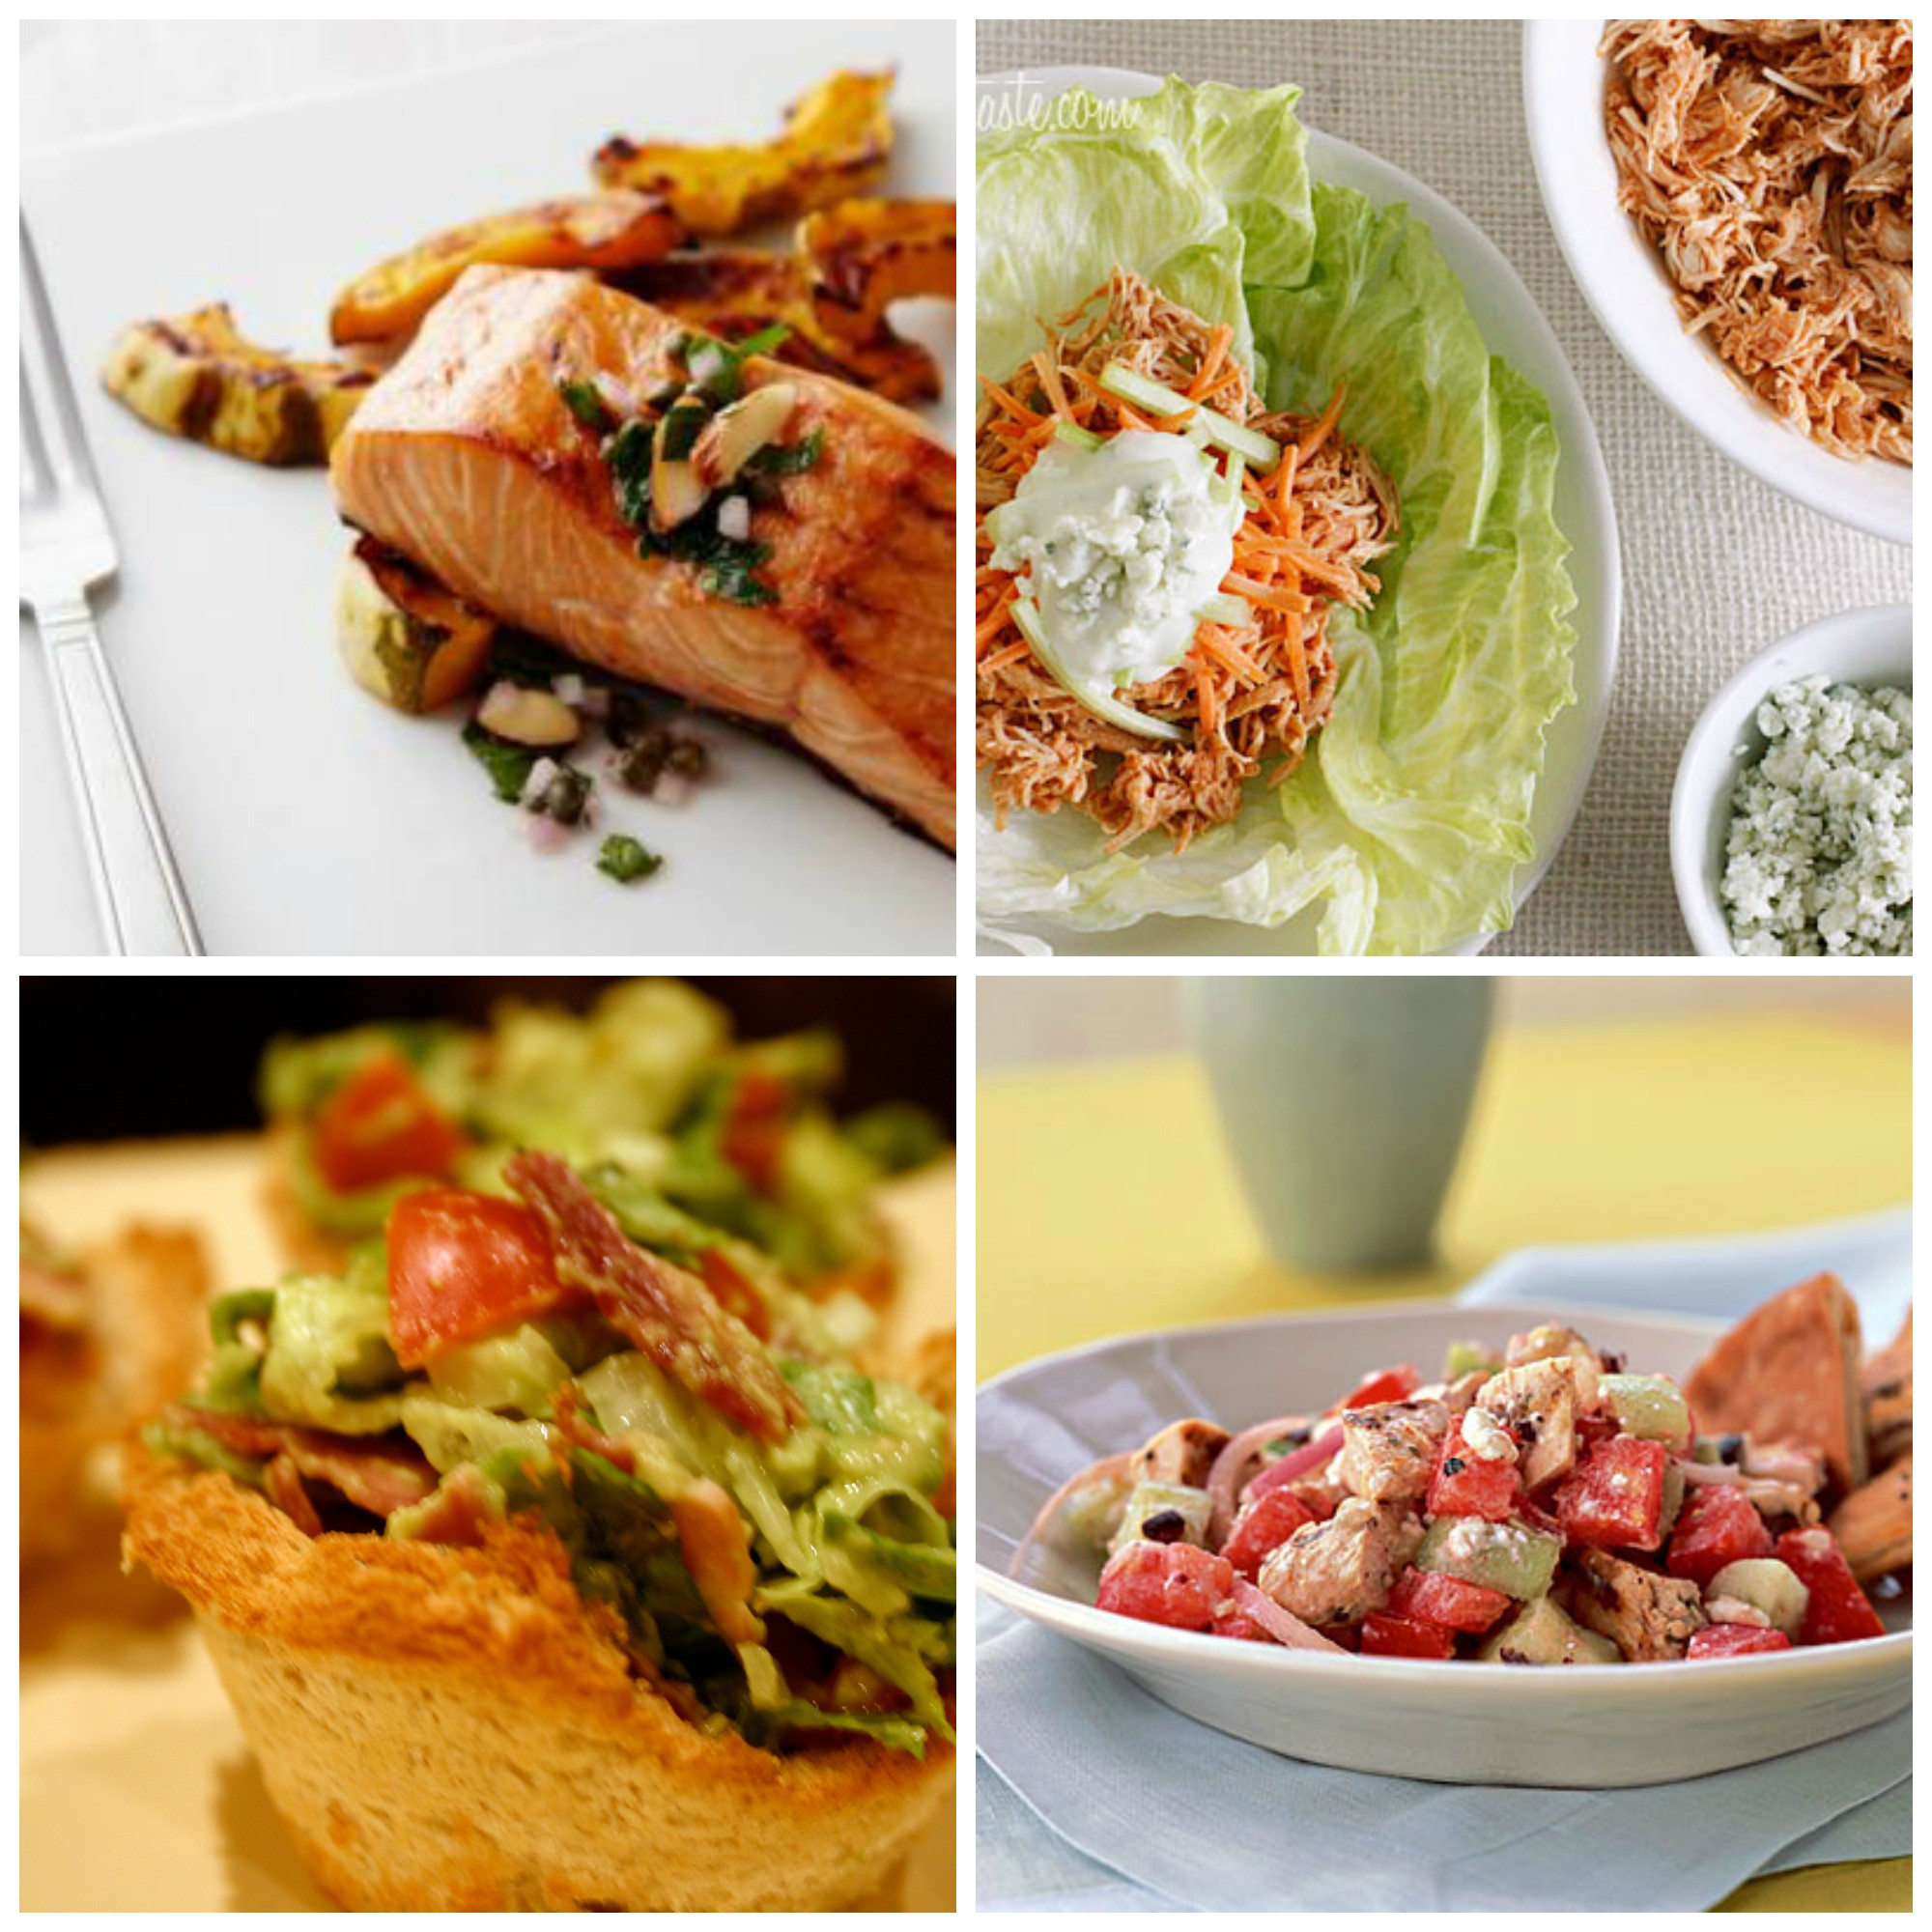 Healthy Light Dinners
 Healthy and light weeknight dinner ideas